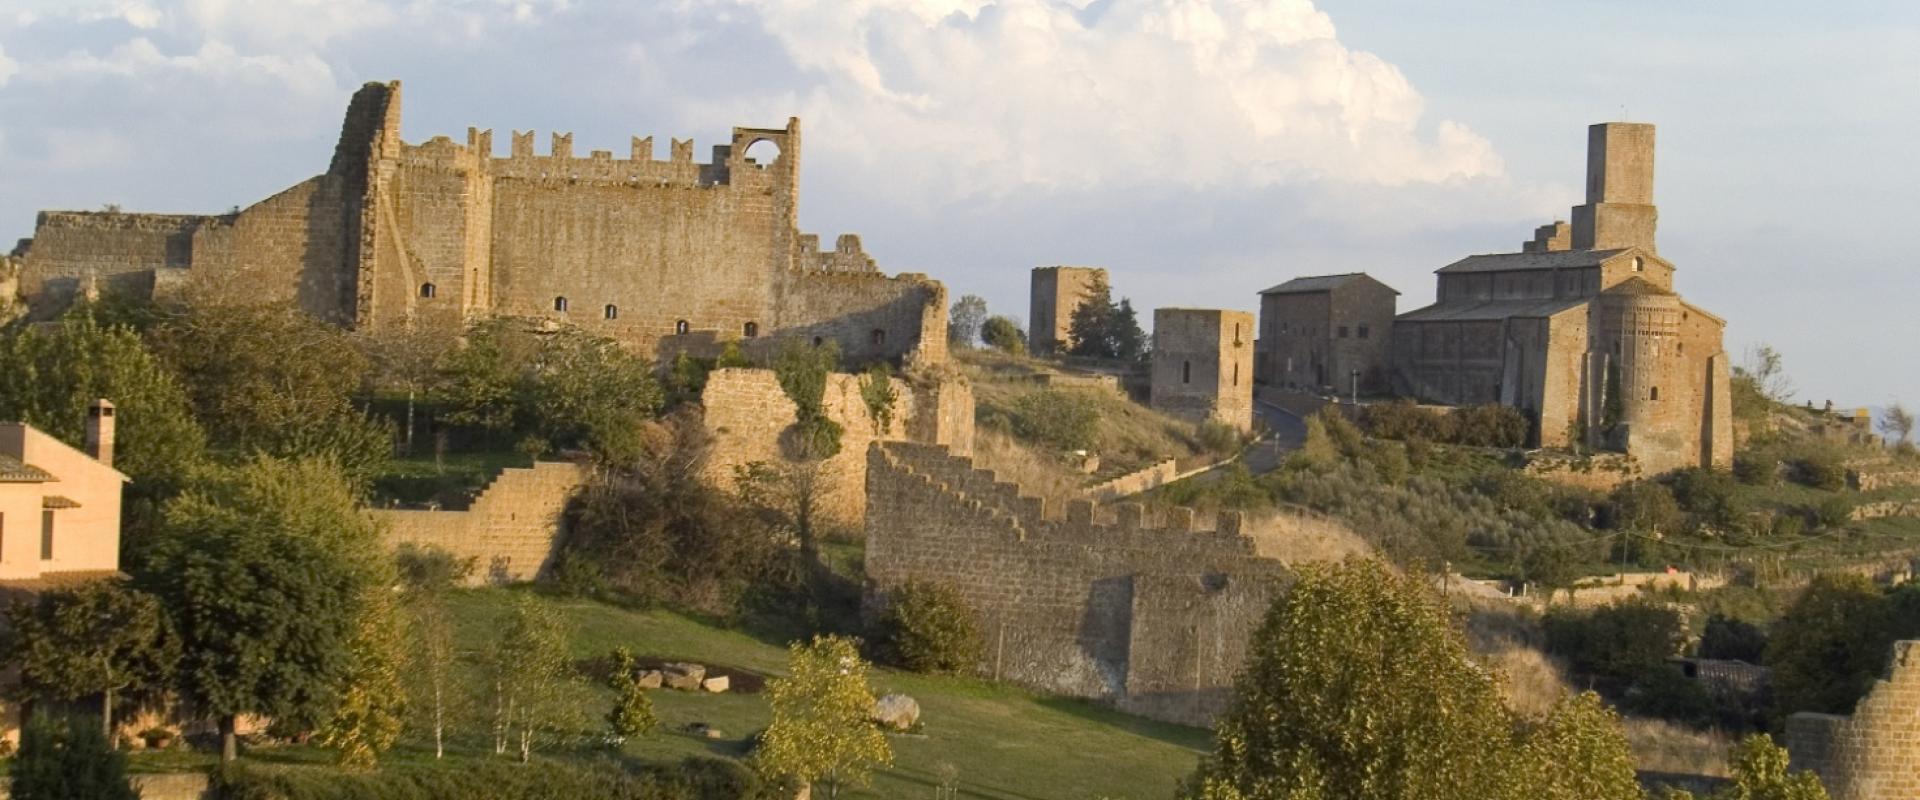 Tour in the ancient towns of Tuscia